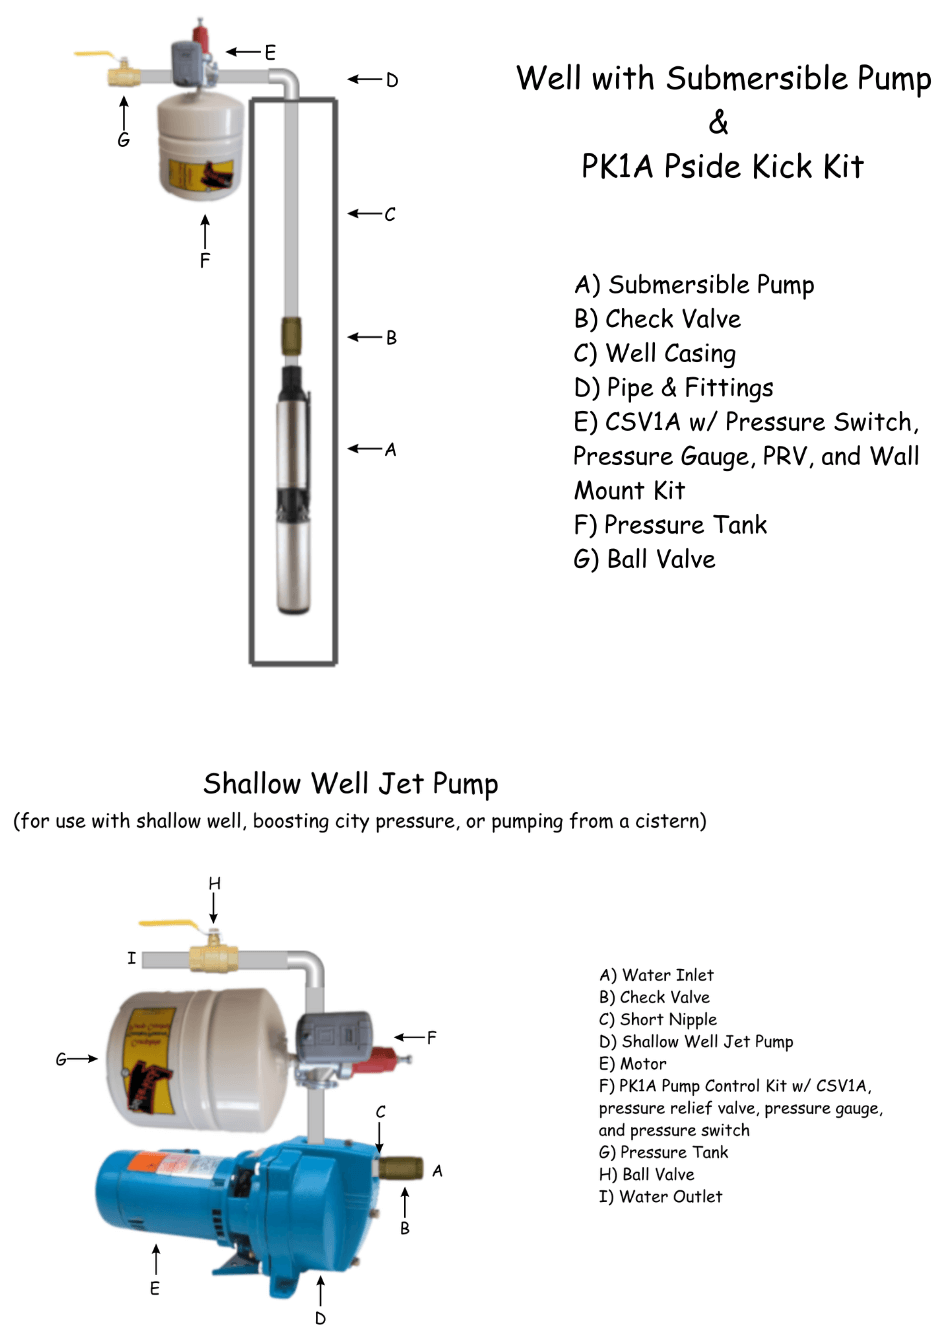 PK1A with submersible in well